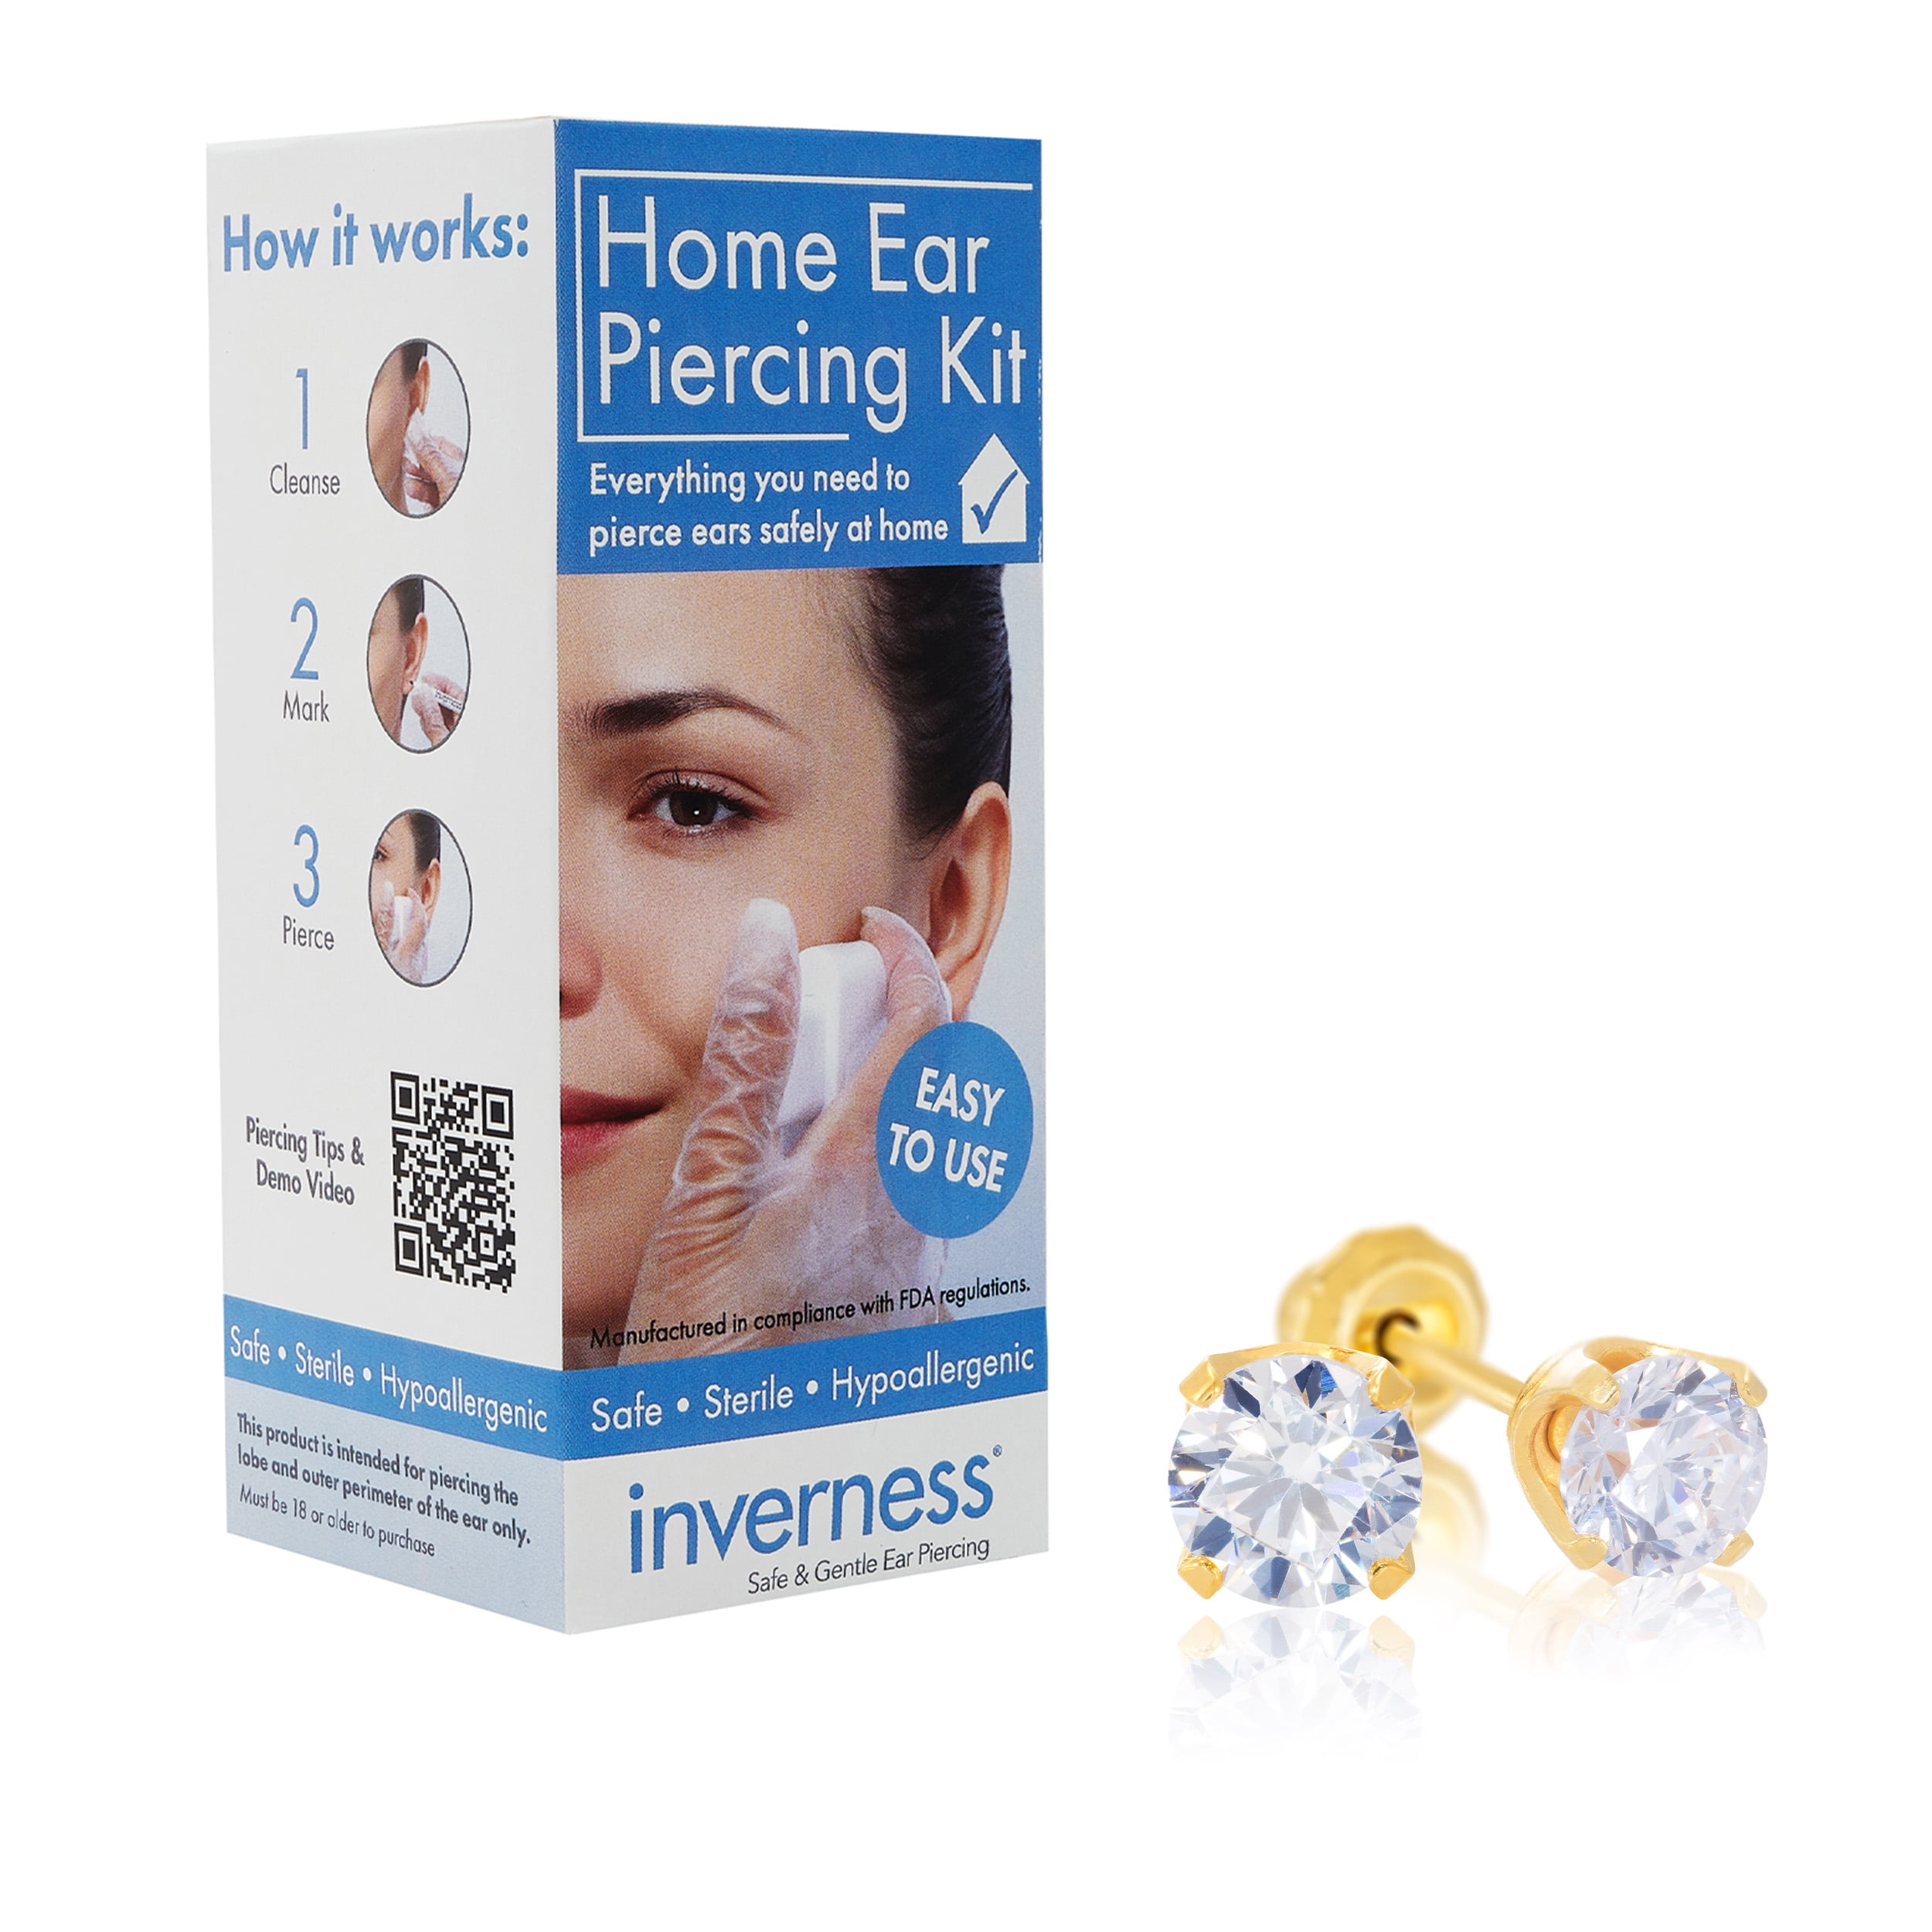 Home Ear Piercing Kit with 14kt Yellow Gold 5mm CZ Earring 070a035a 1685 4dcd 9084 6a8be1748f42.df25fe8dd9563651d61f0640b452a6d6